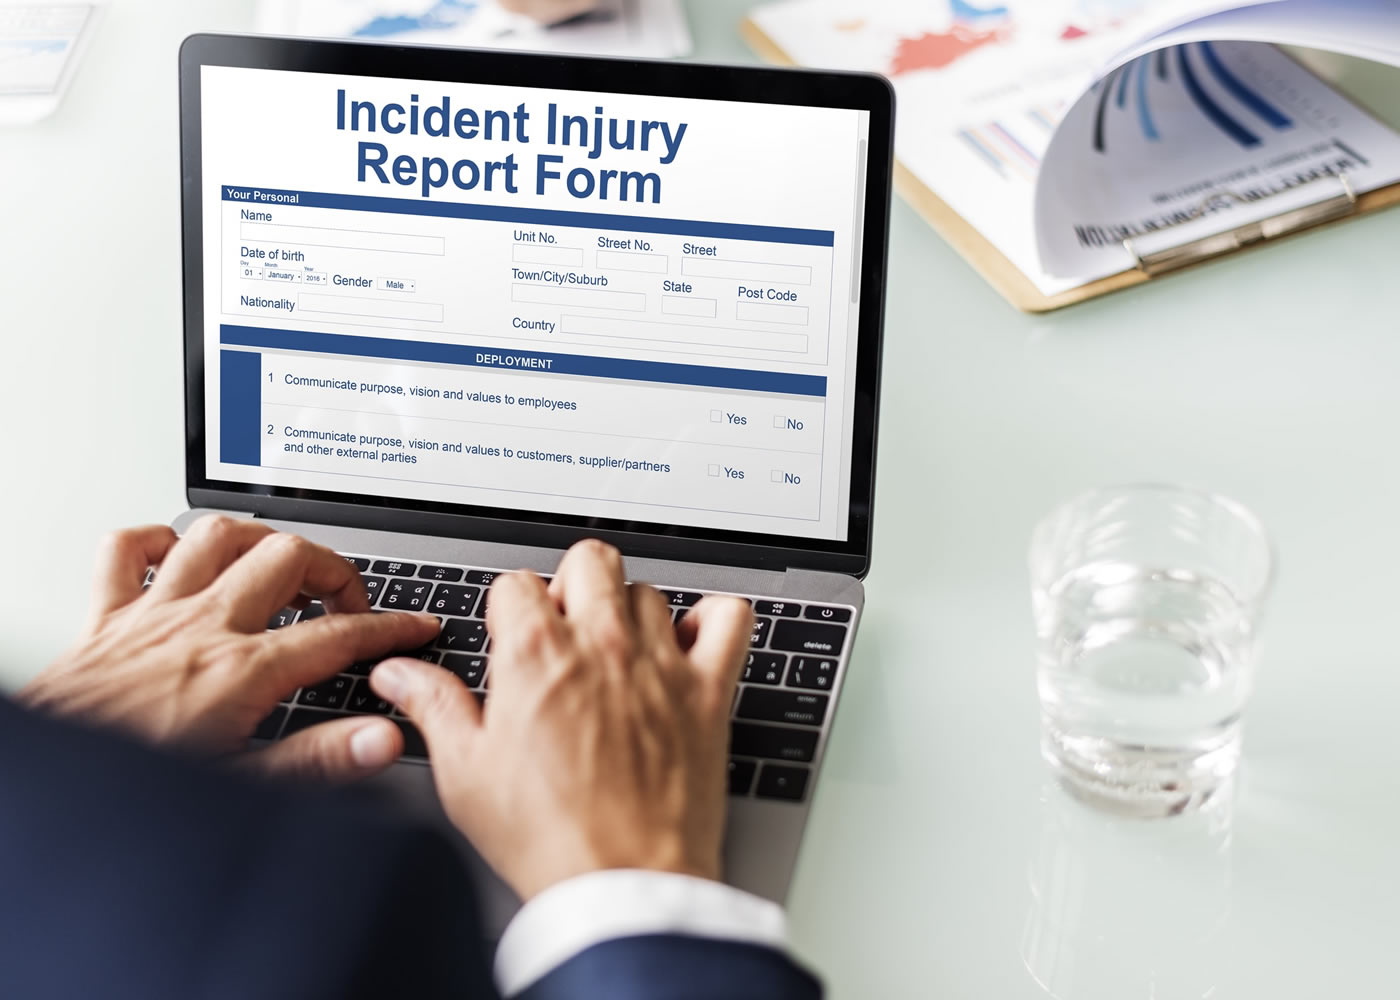 naem-2018-article-incident-injury-report-form-document-concept-700x500